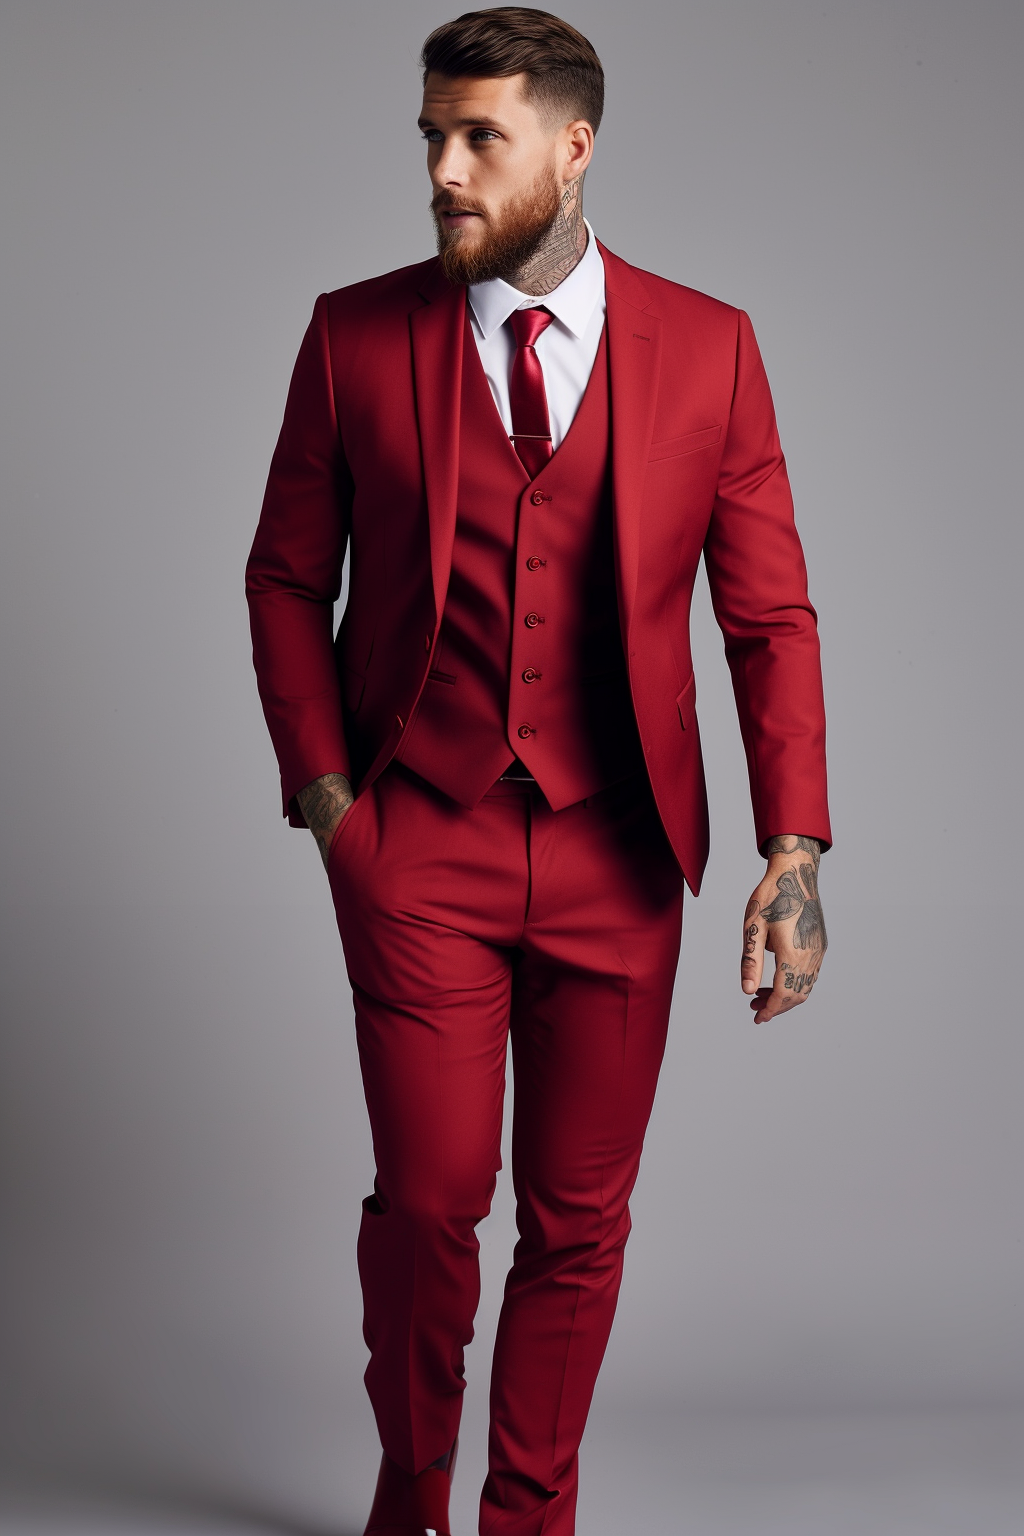 Red Double Breasted Men Suits Blazer Pants Slim Fit Prom Grooms Wedding  Tuxedo Business Suits Custom Made at Amazon Men's Clothing store